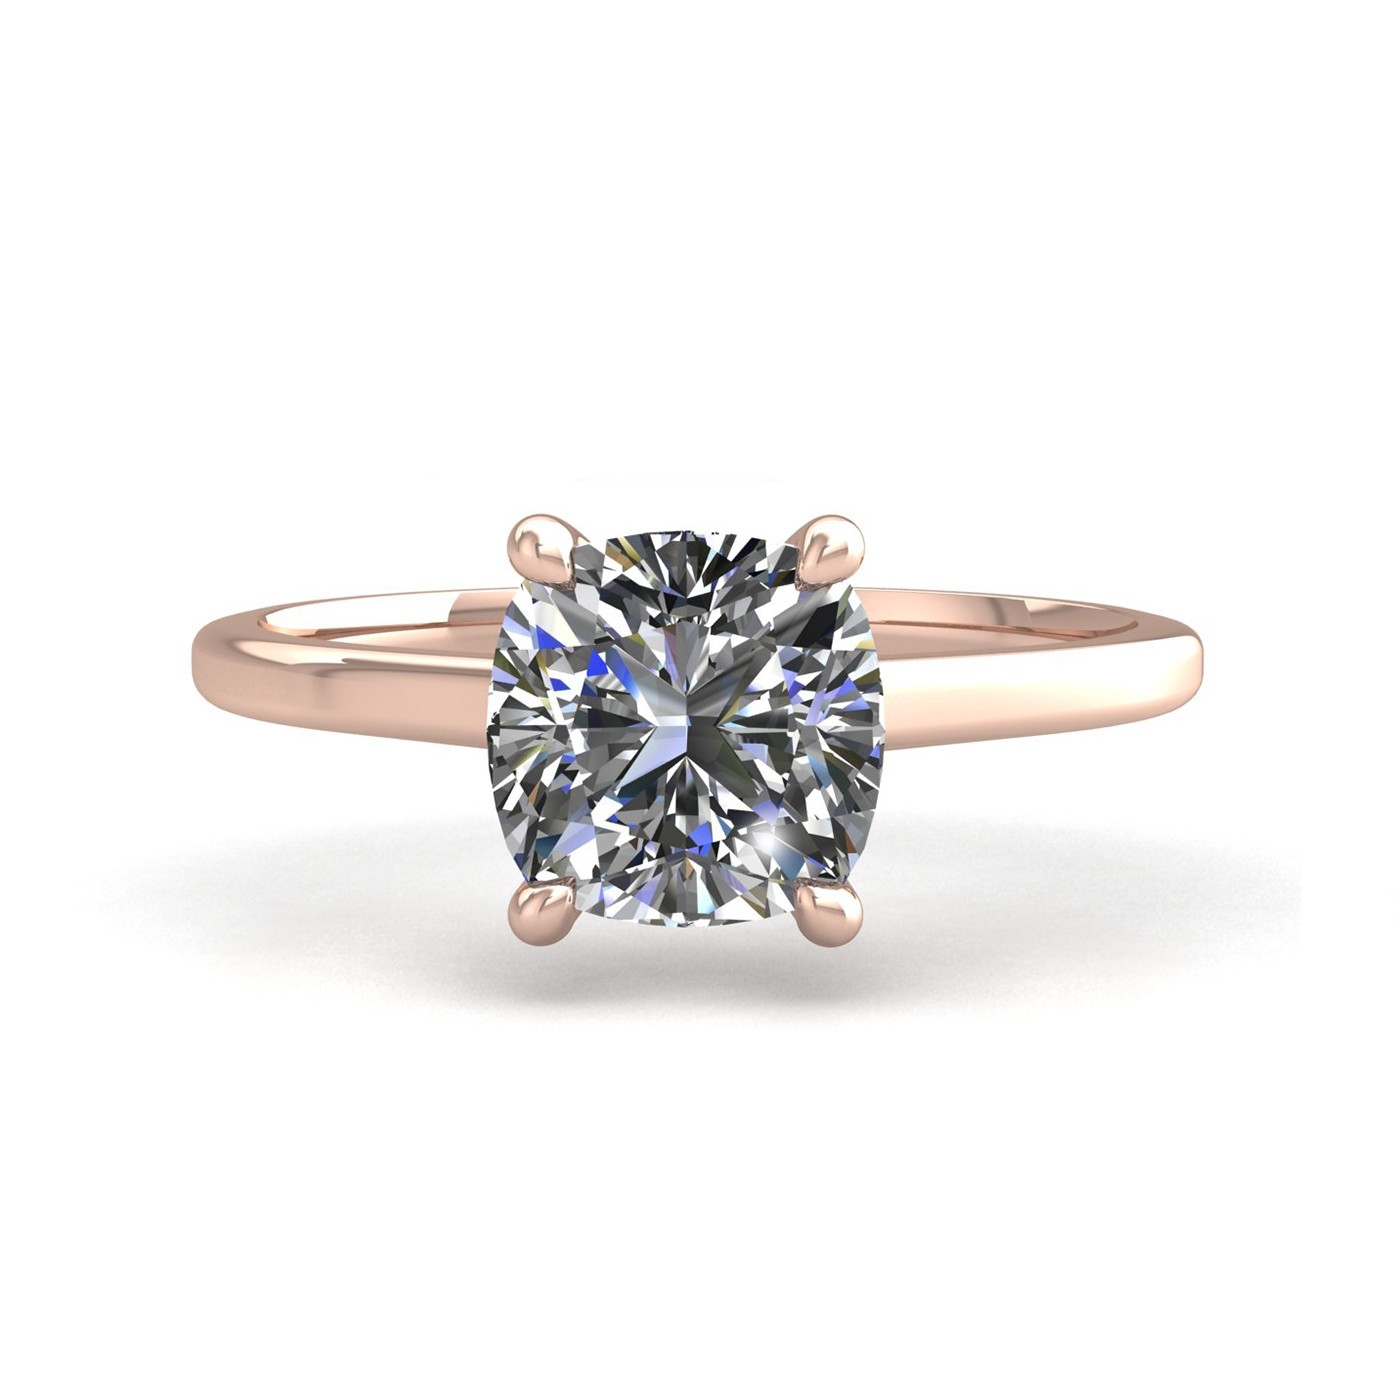 18k rose gold 0,80 ct 4 prongs solitaire cushion cut diamond engagement ring with whisper thin band Photos & images